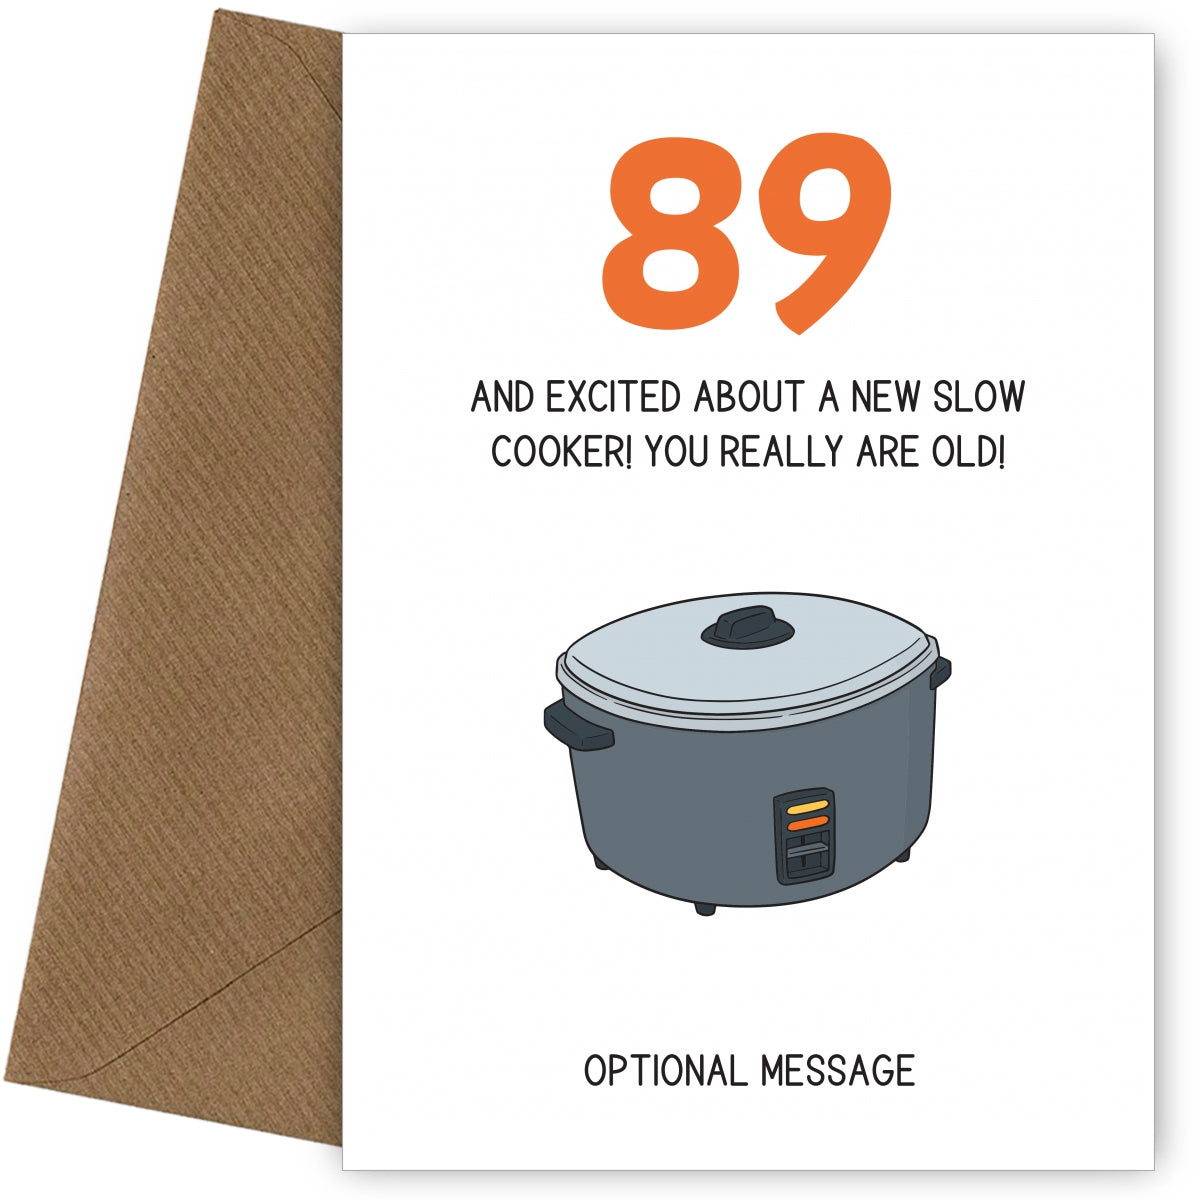 Happy 89th Birthday Card - Excited About a Slow Cooker!